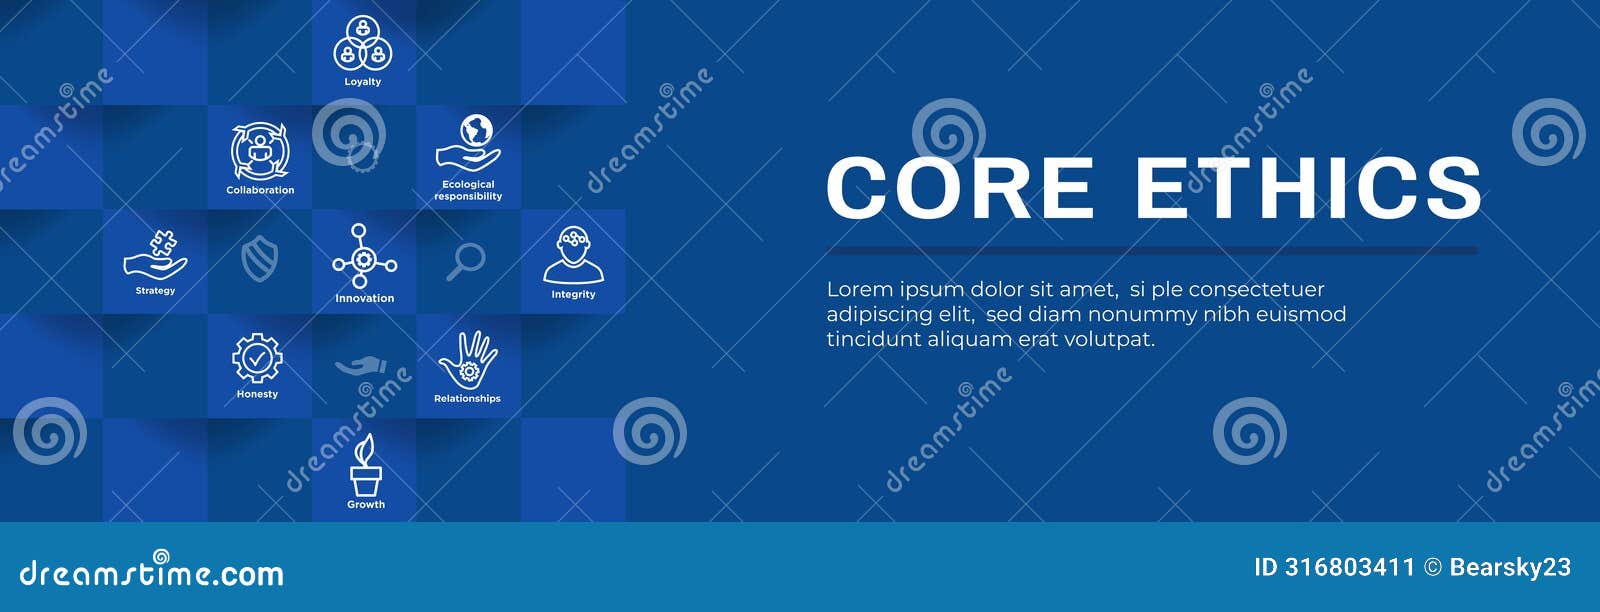 core ethics web header banner with dedication integrity and mission core values icons